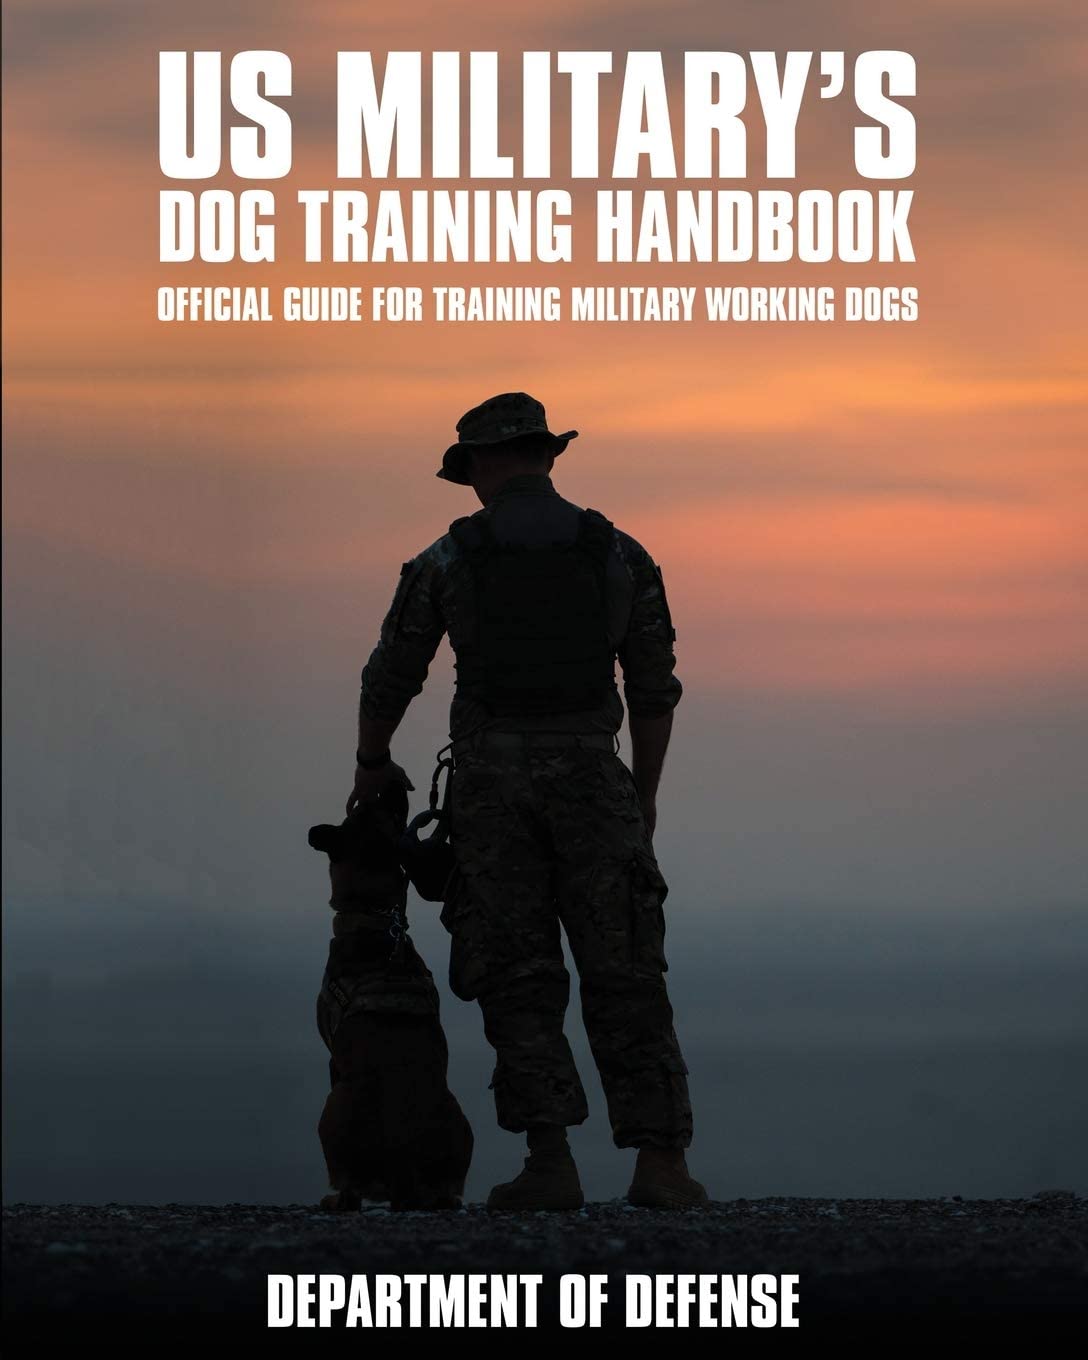 U.S. Military’s Dog Training Handbook: Official Guide for Training Military Working Dogs